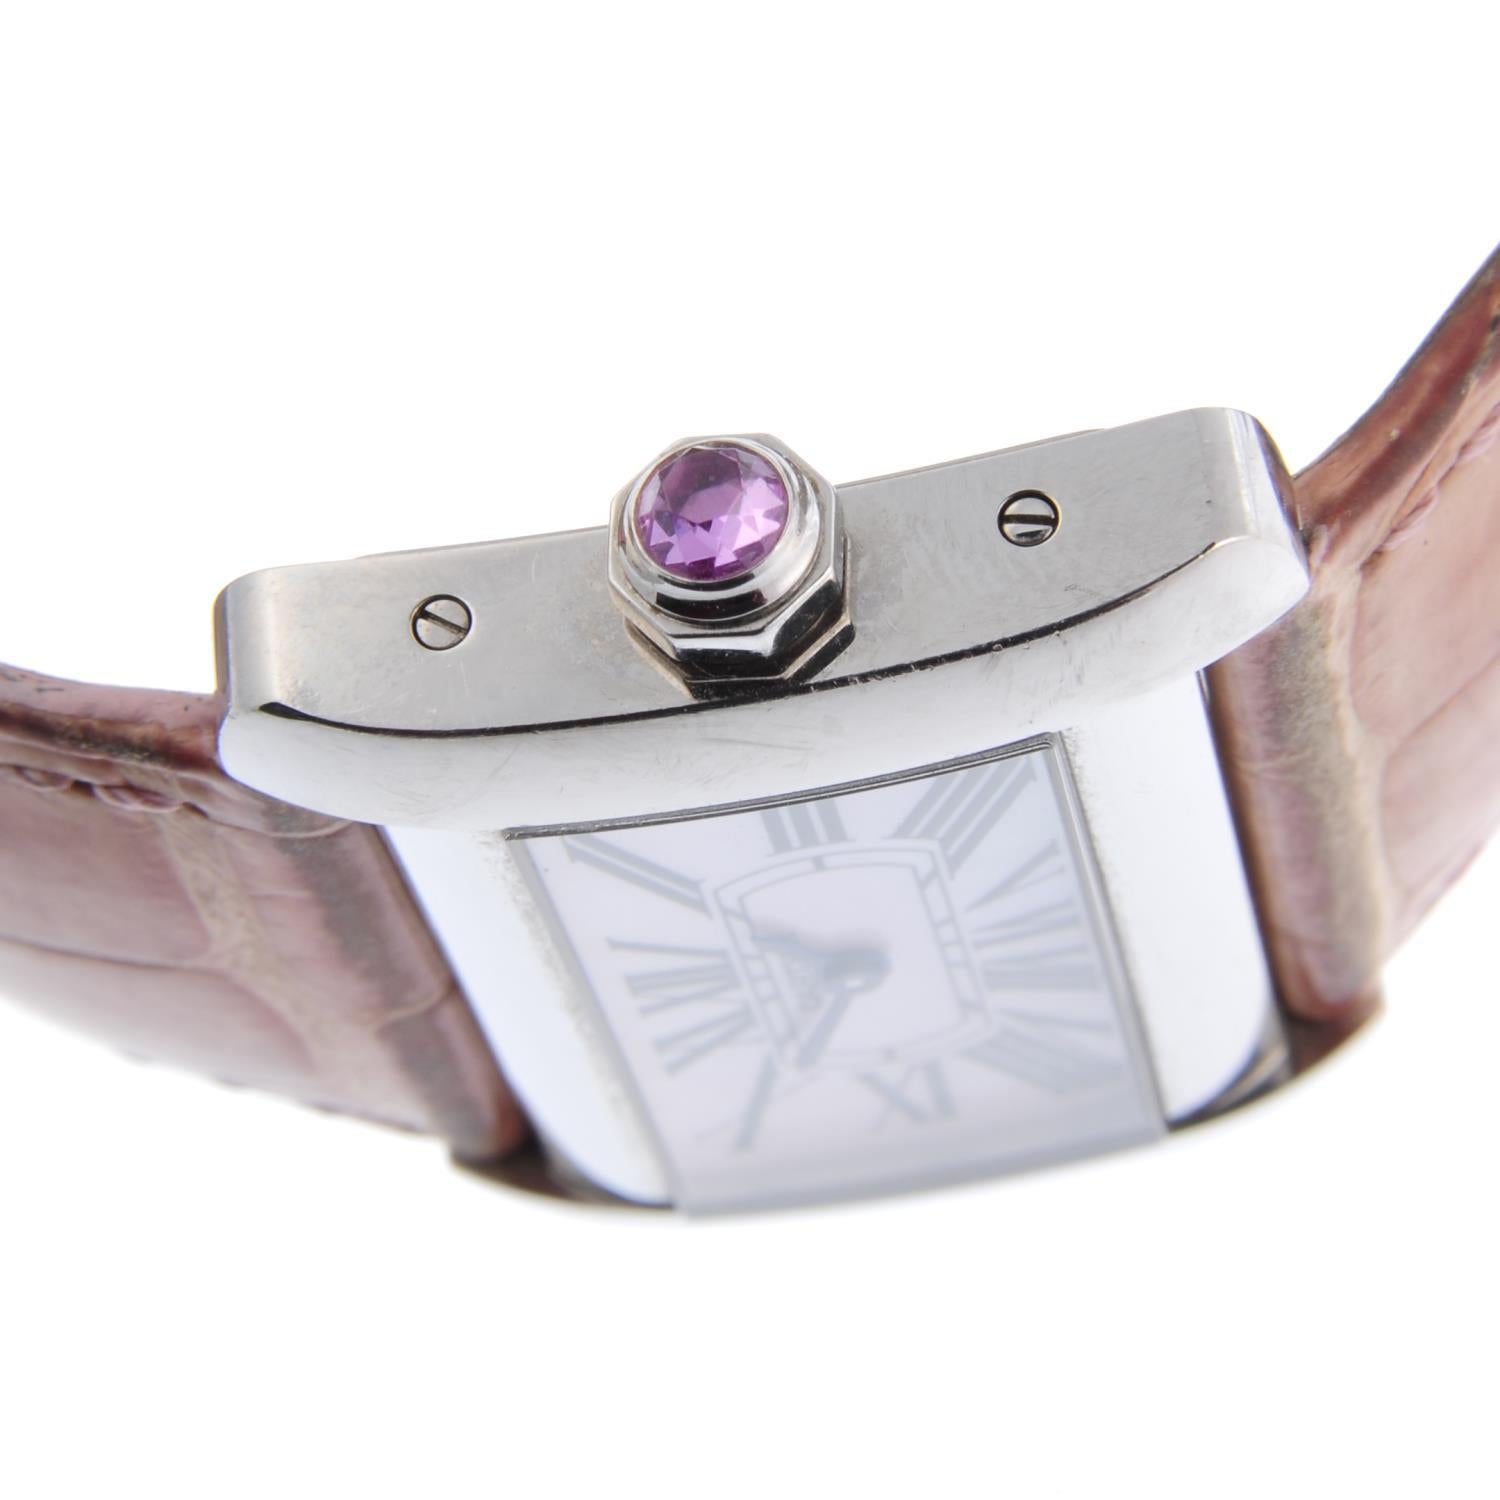 BERNARDO ANTICHITÀ PONTE VECCHIO FLORENCE
Reference 2599, serial 757733CE. Signed quartz calibre 157. Mother-of-pearl dial with Roman numeral hour markers. Fitted to a signed pink alligator strap with stainless steel pin buckle. 31mm. 